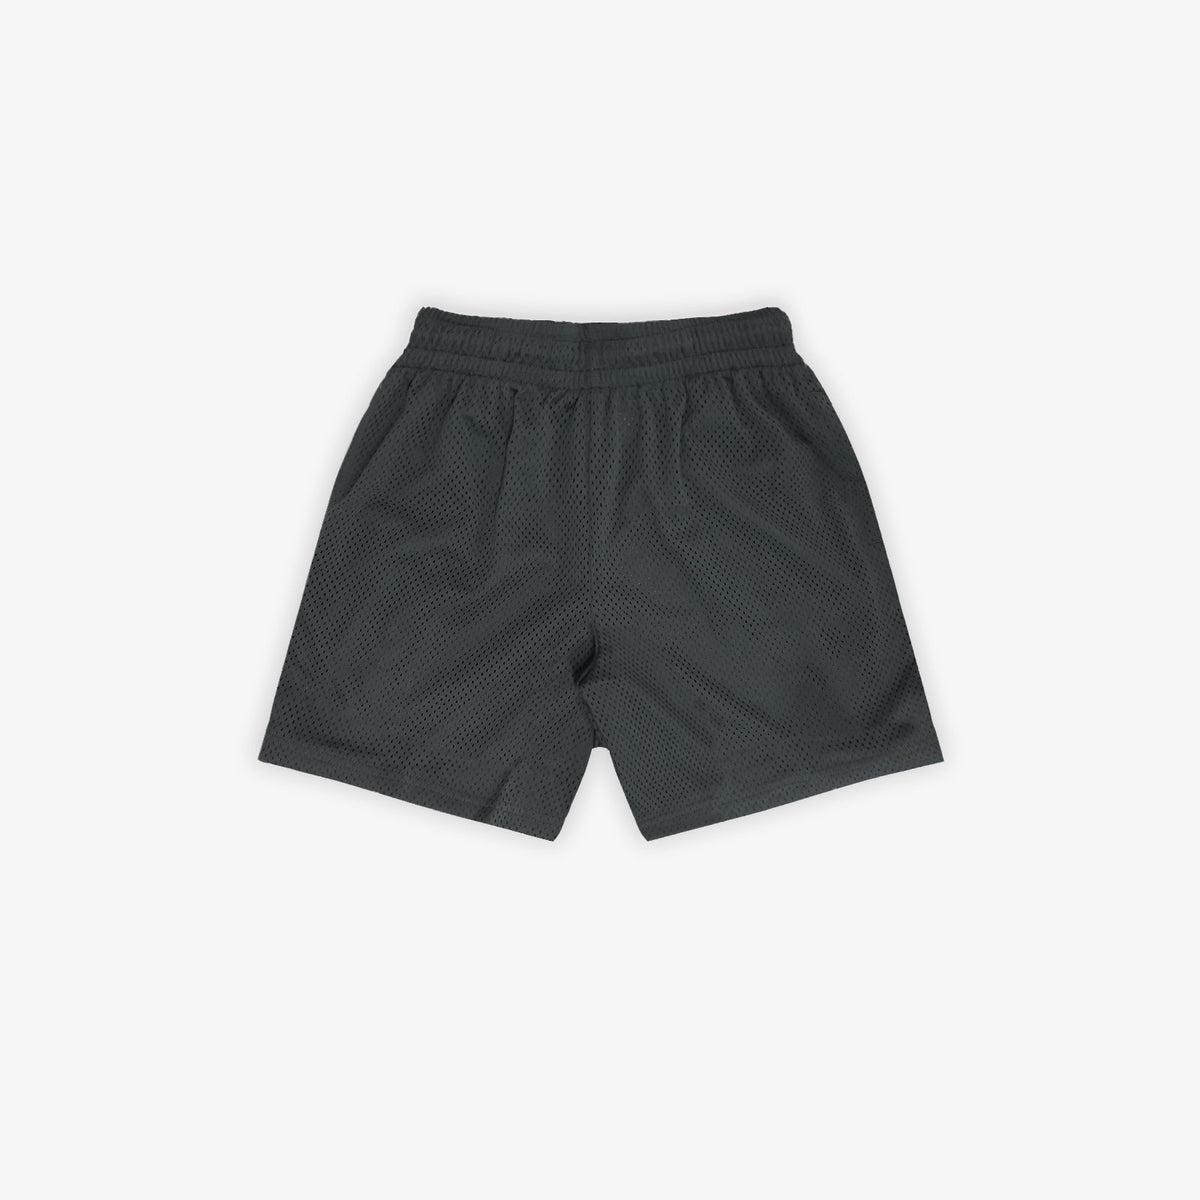 Brooklyn Nets Dri-FIT Play Youth Shorts - Anthracite